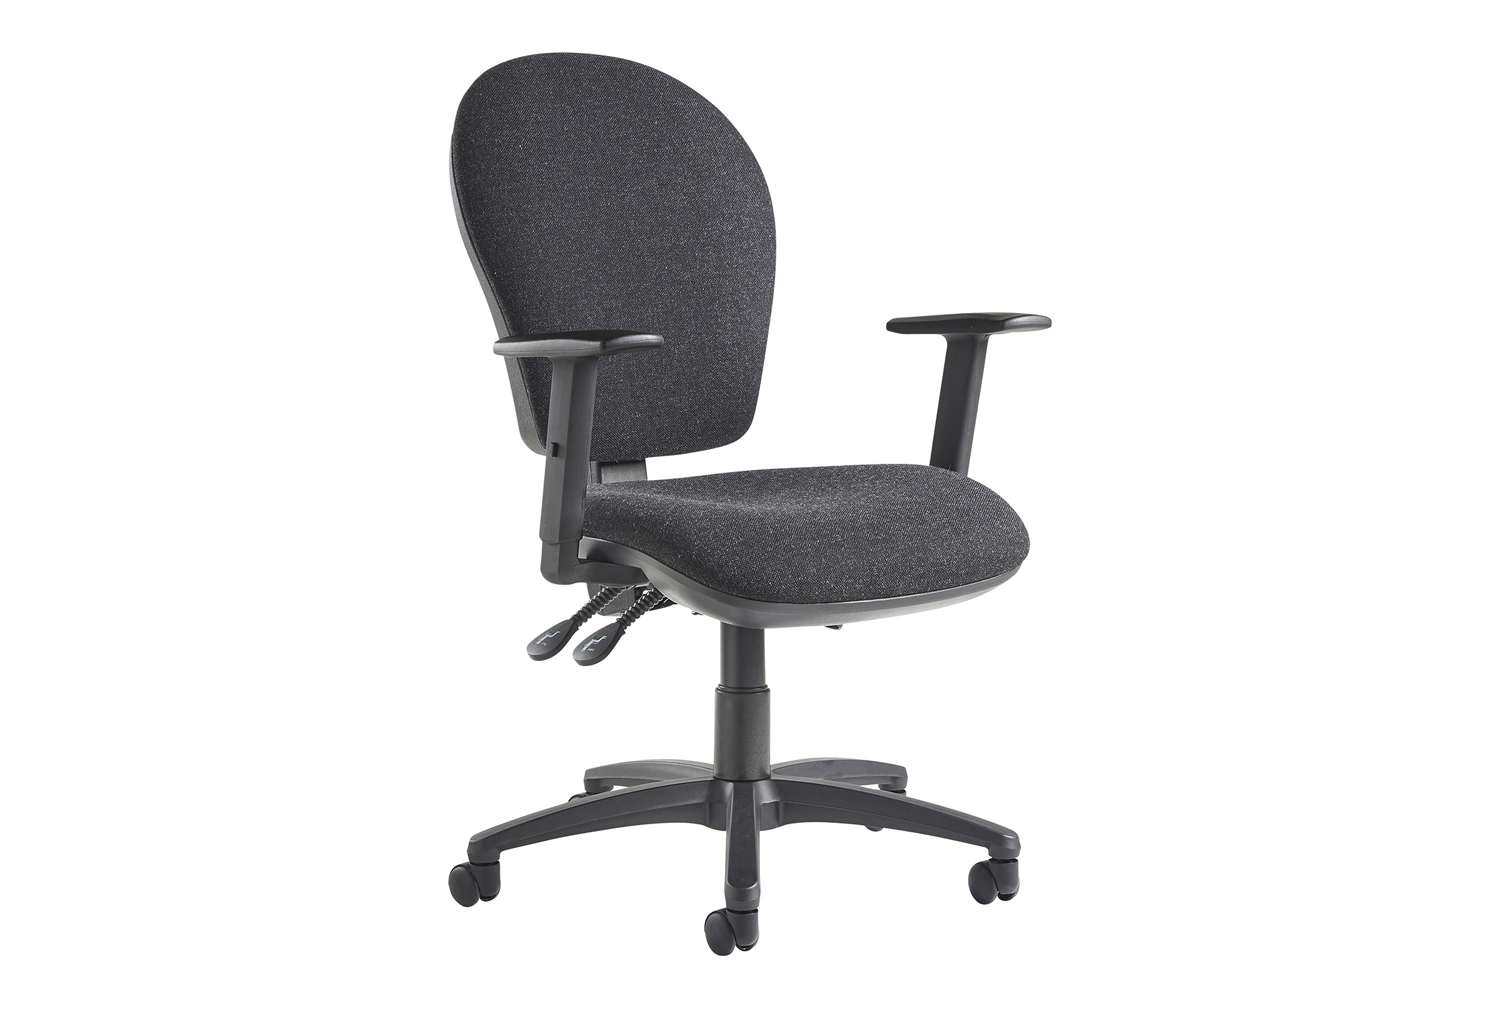 Castle Extra High Back Operator Office Chair With Adjustable Arms, Tarot